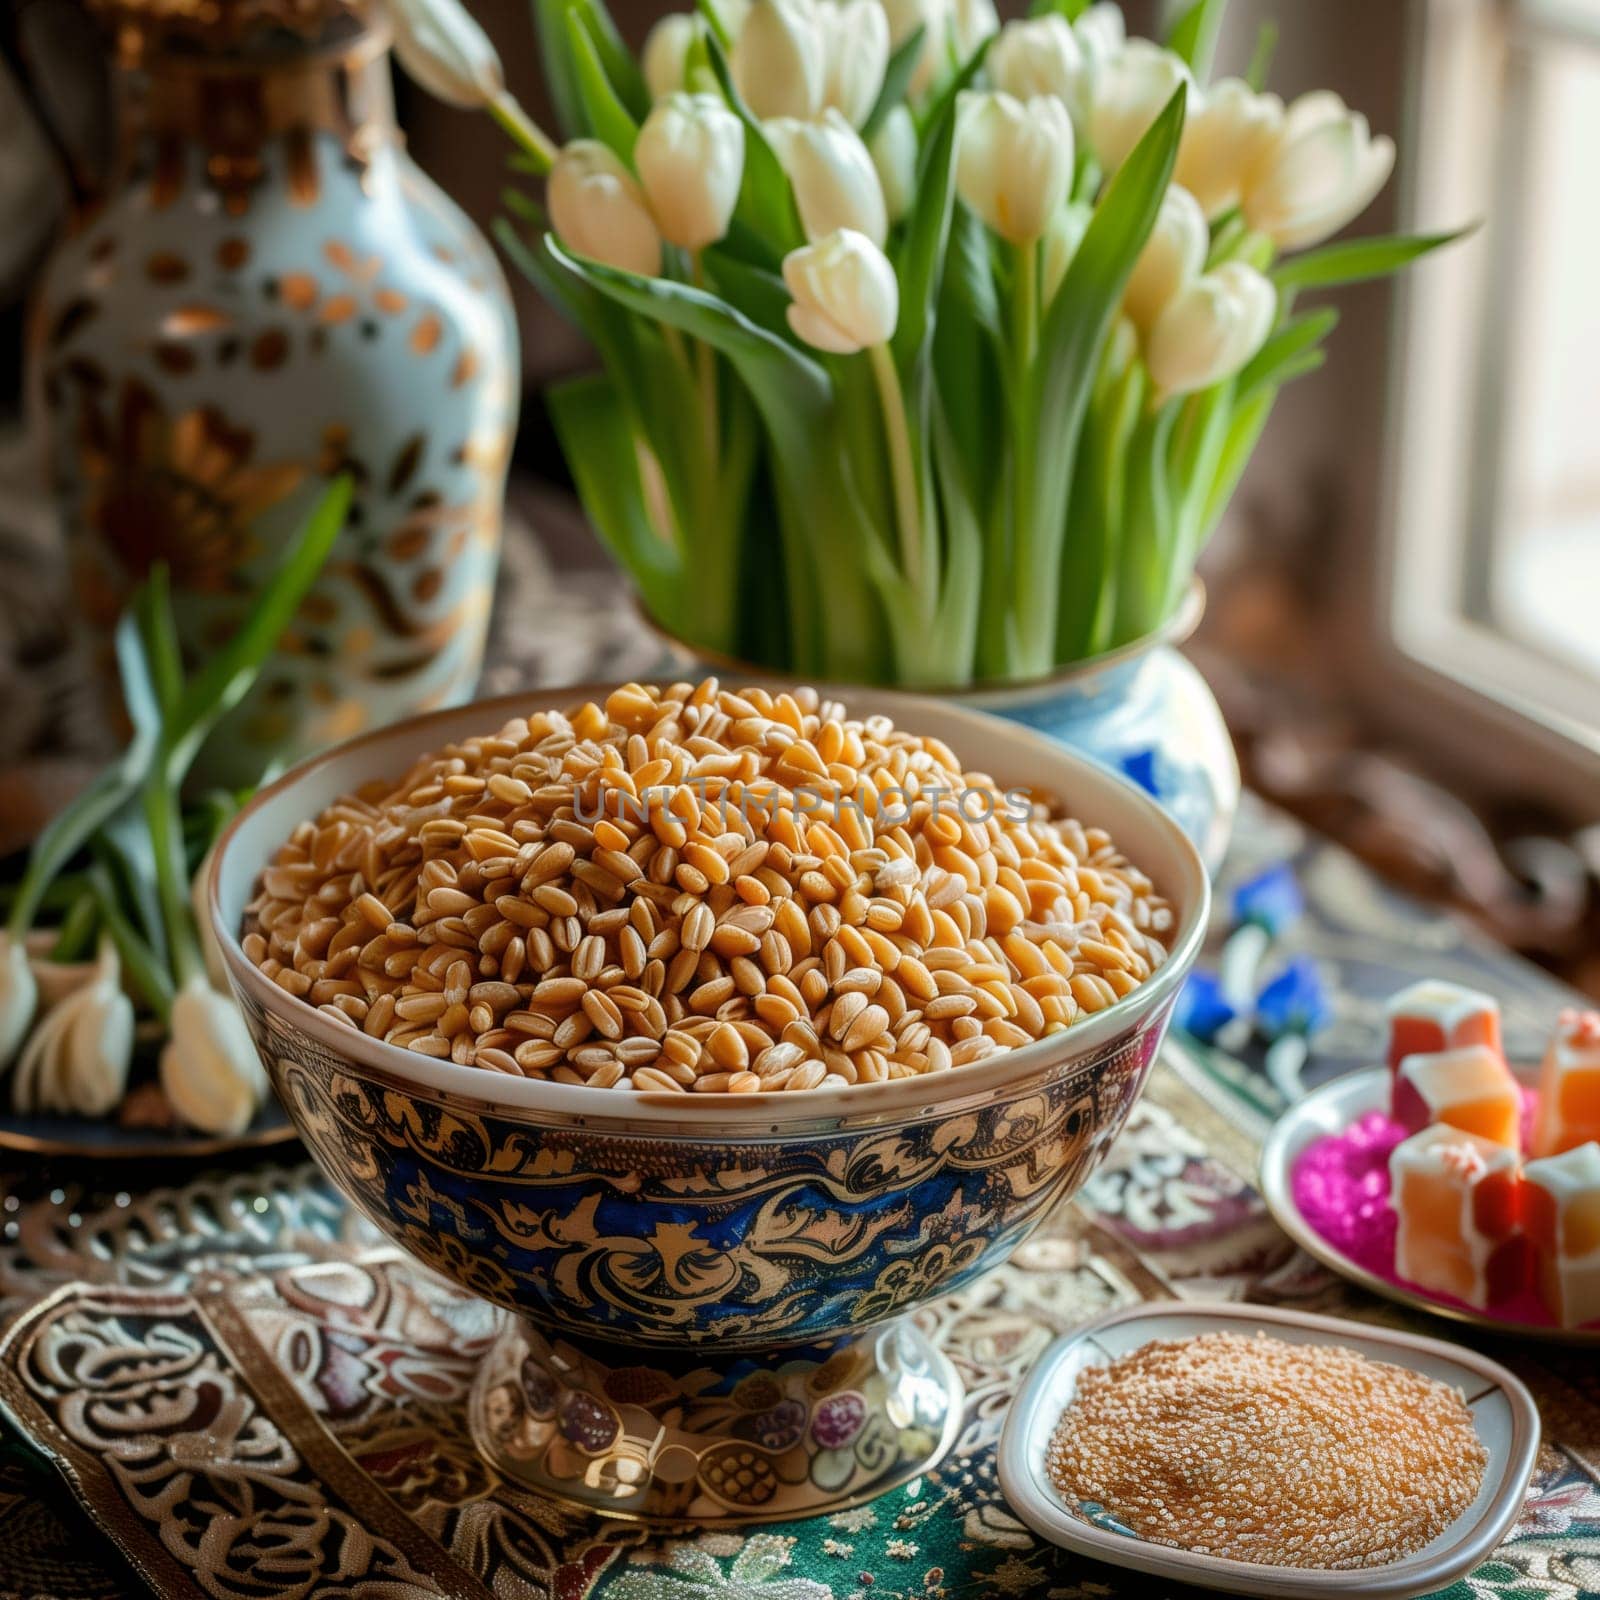 Wheat in a dish and sweets on the table. by Nataliya